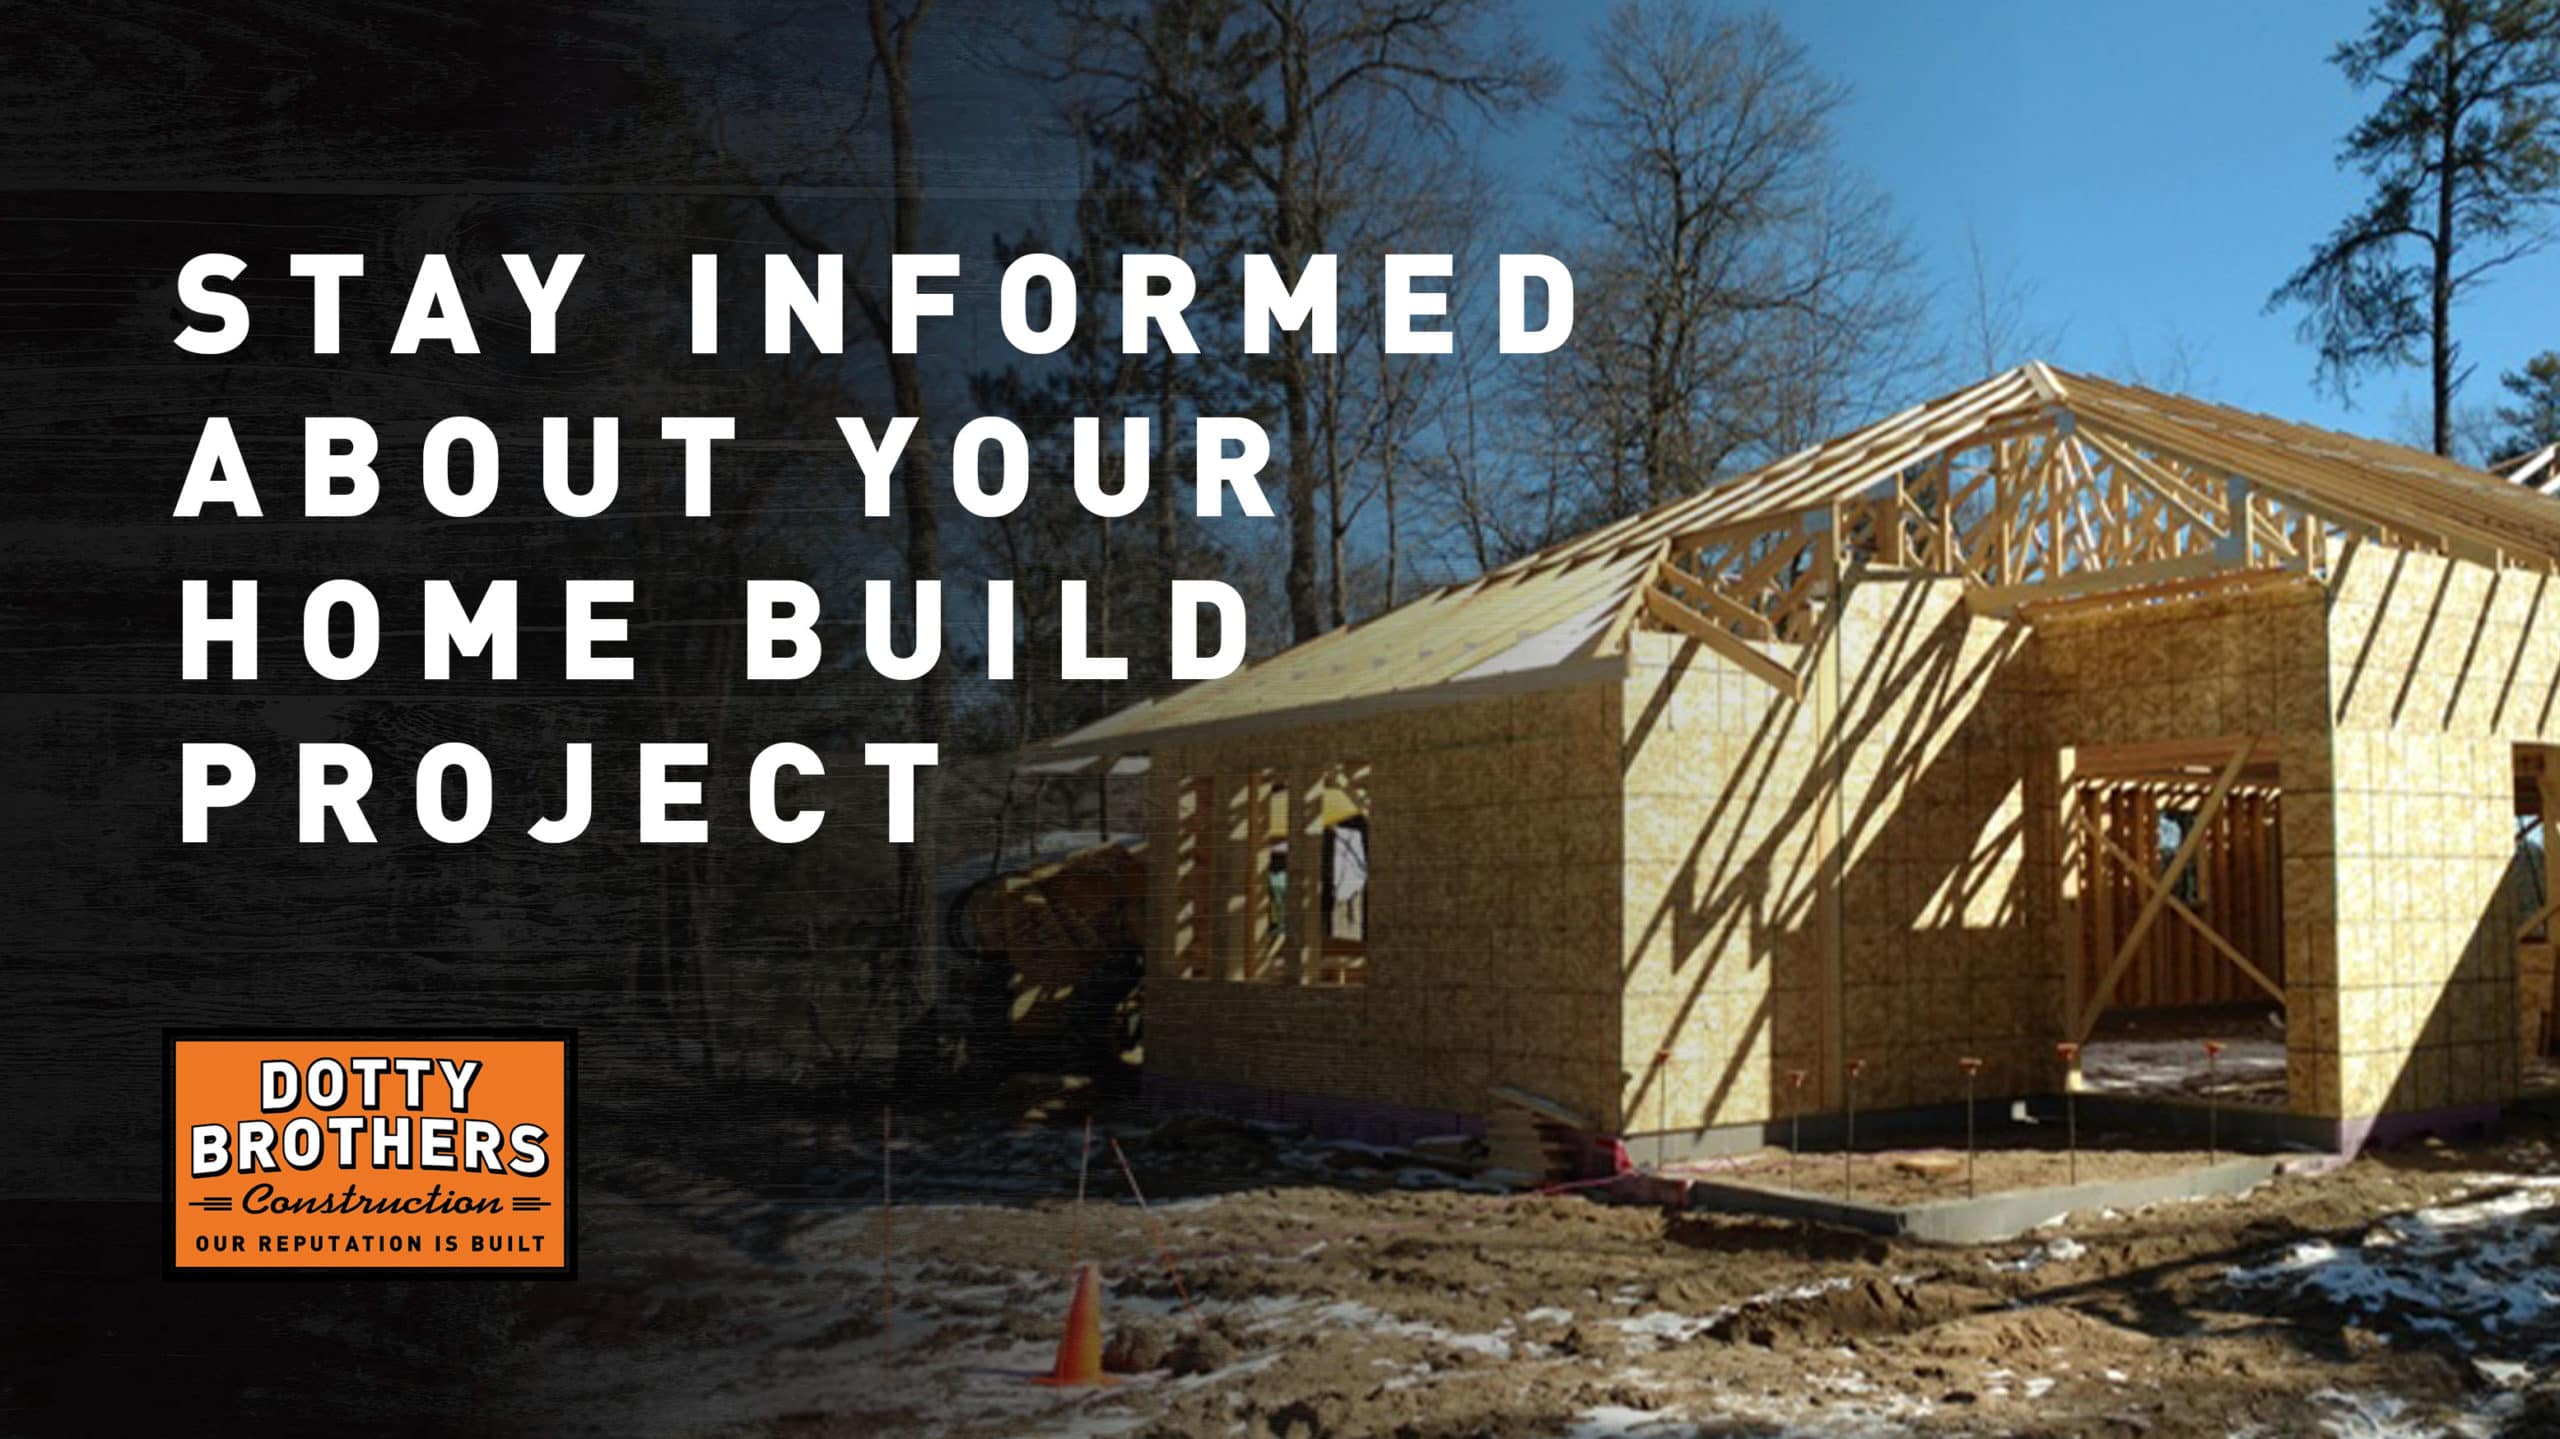 Stay informed about your home build